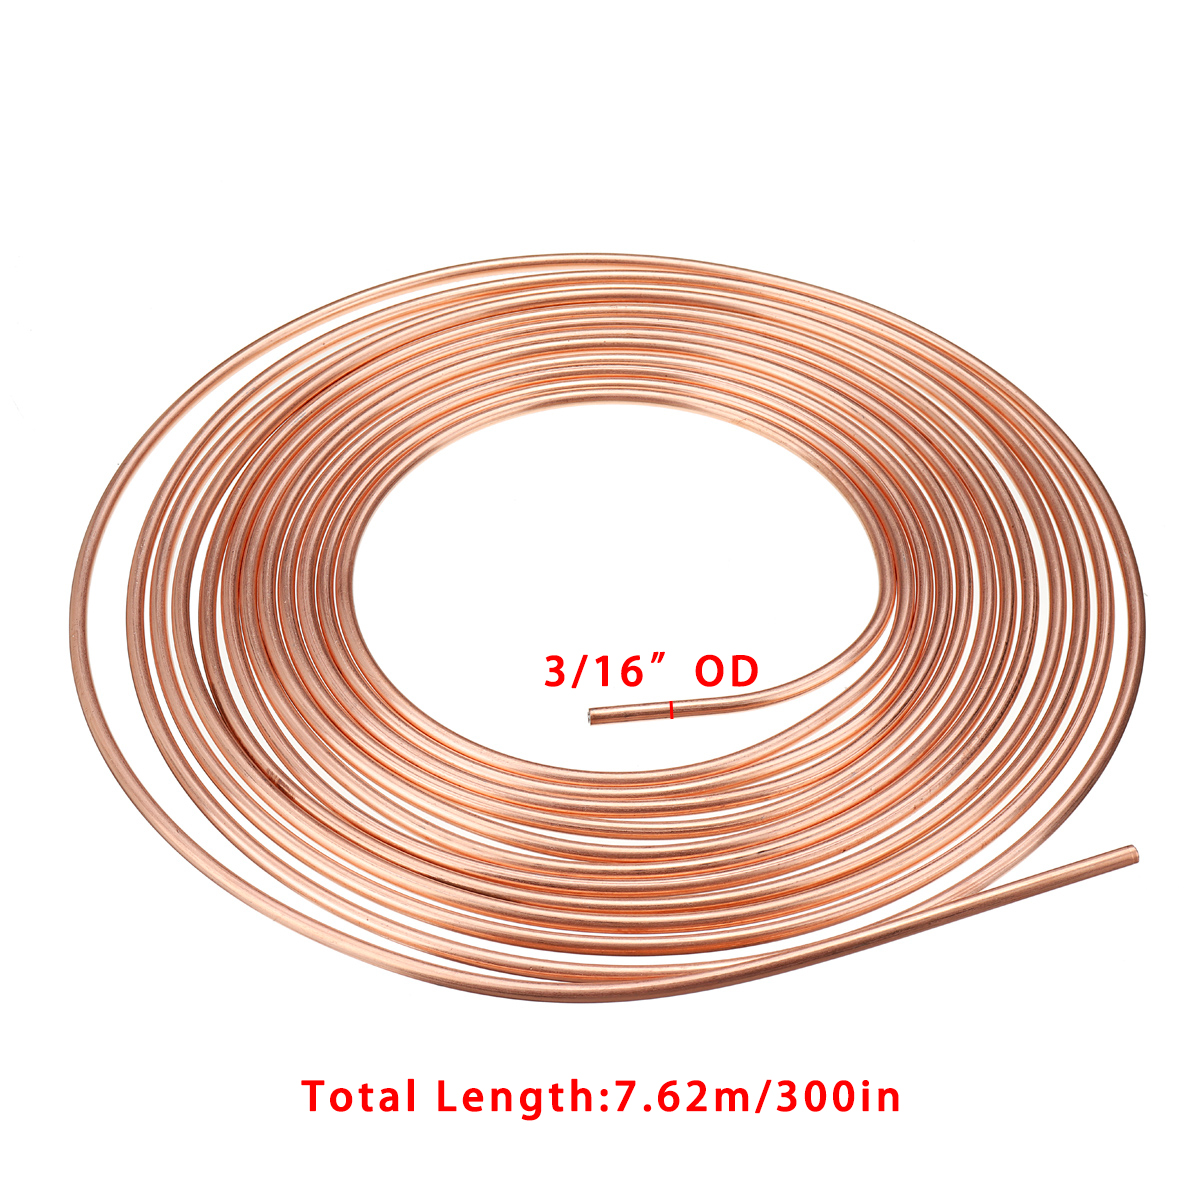 Universal-25Ft-Copper-Nickel-Brake-Line-Tubing-Kit-316quot-OD-with-15Pcs-Nuts-1586631-3